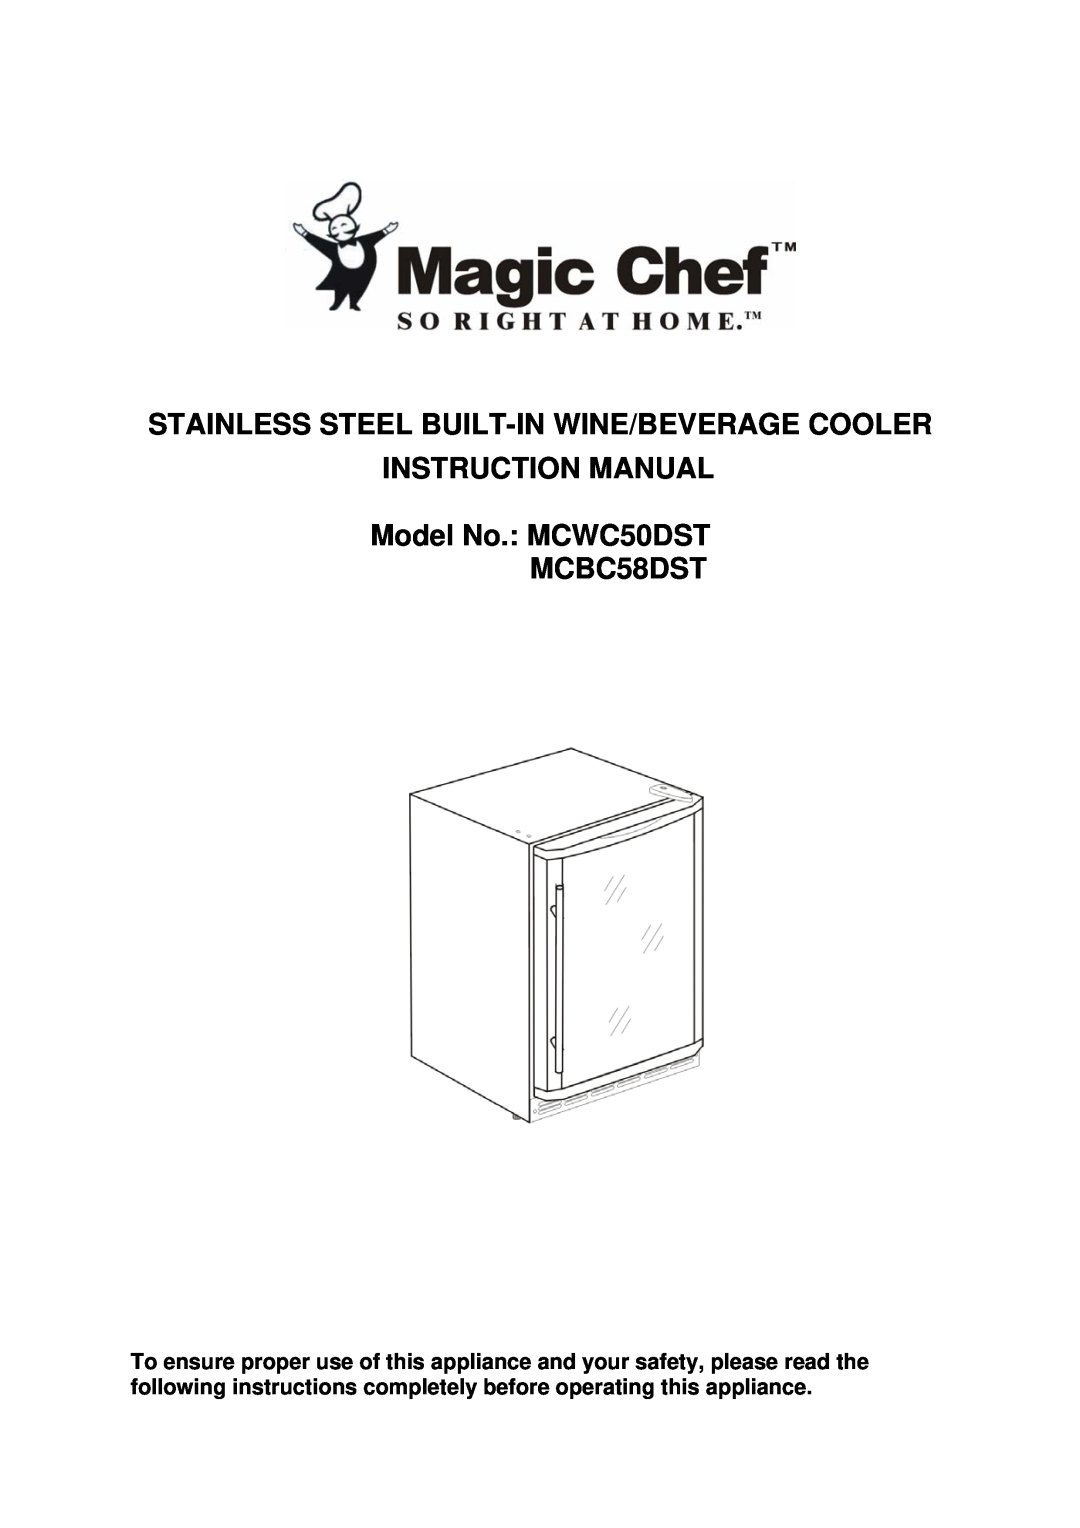 Magic Chef instruction manual Model No. MCWC50DST MCBC58DST 